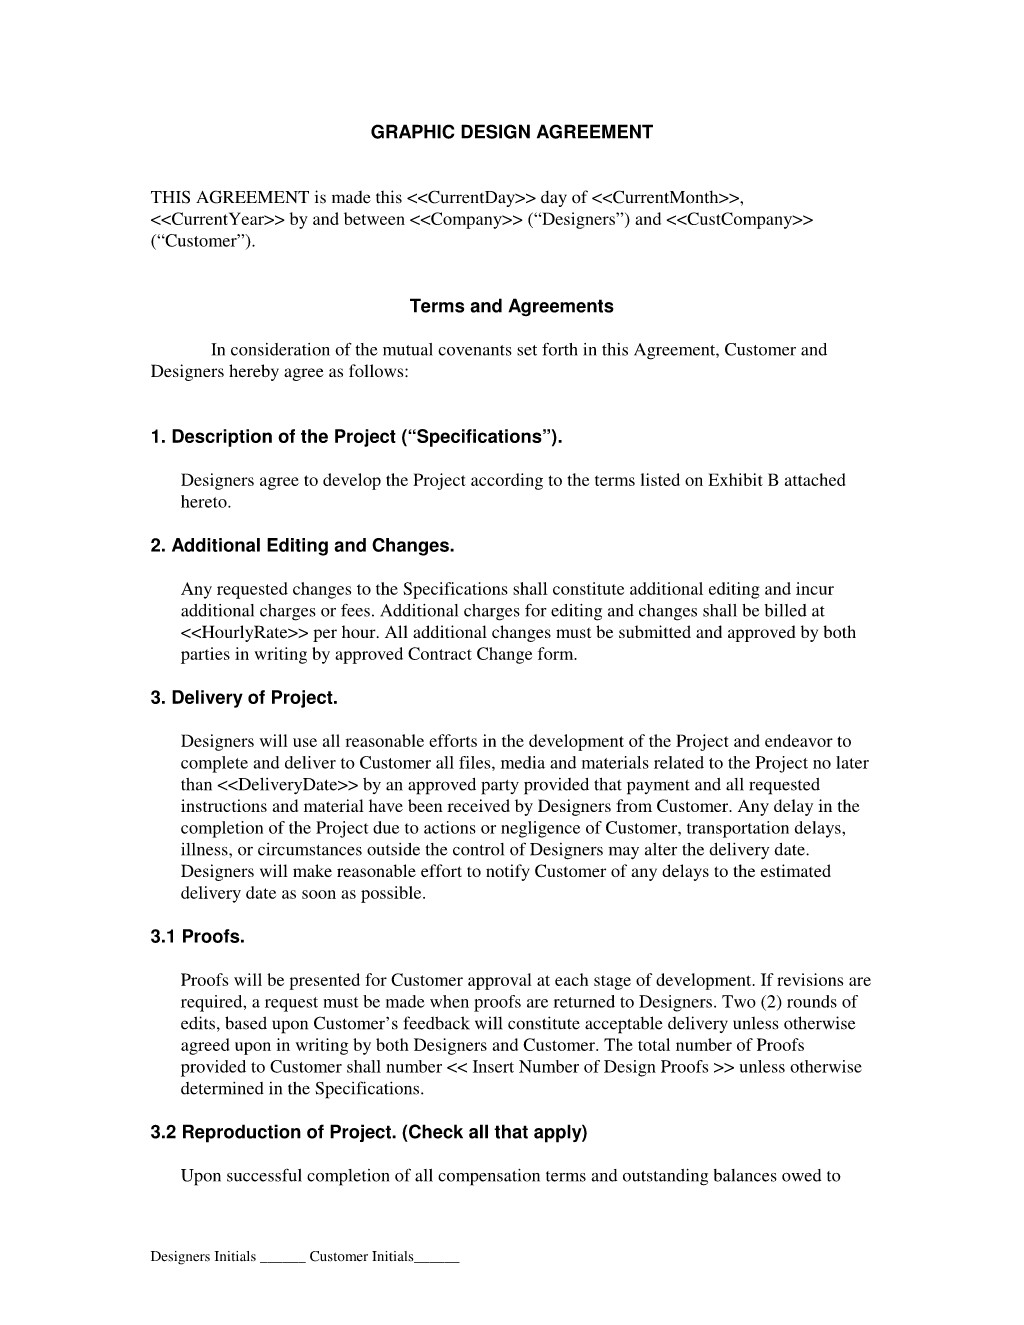 Design Contract Template Com Document Graphic Agreement